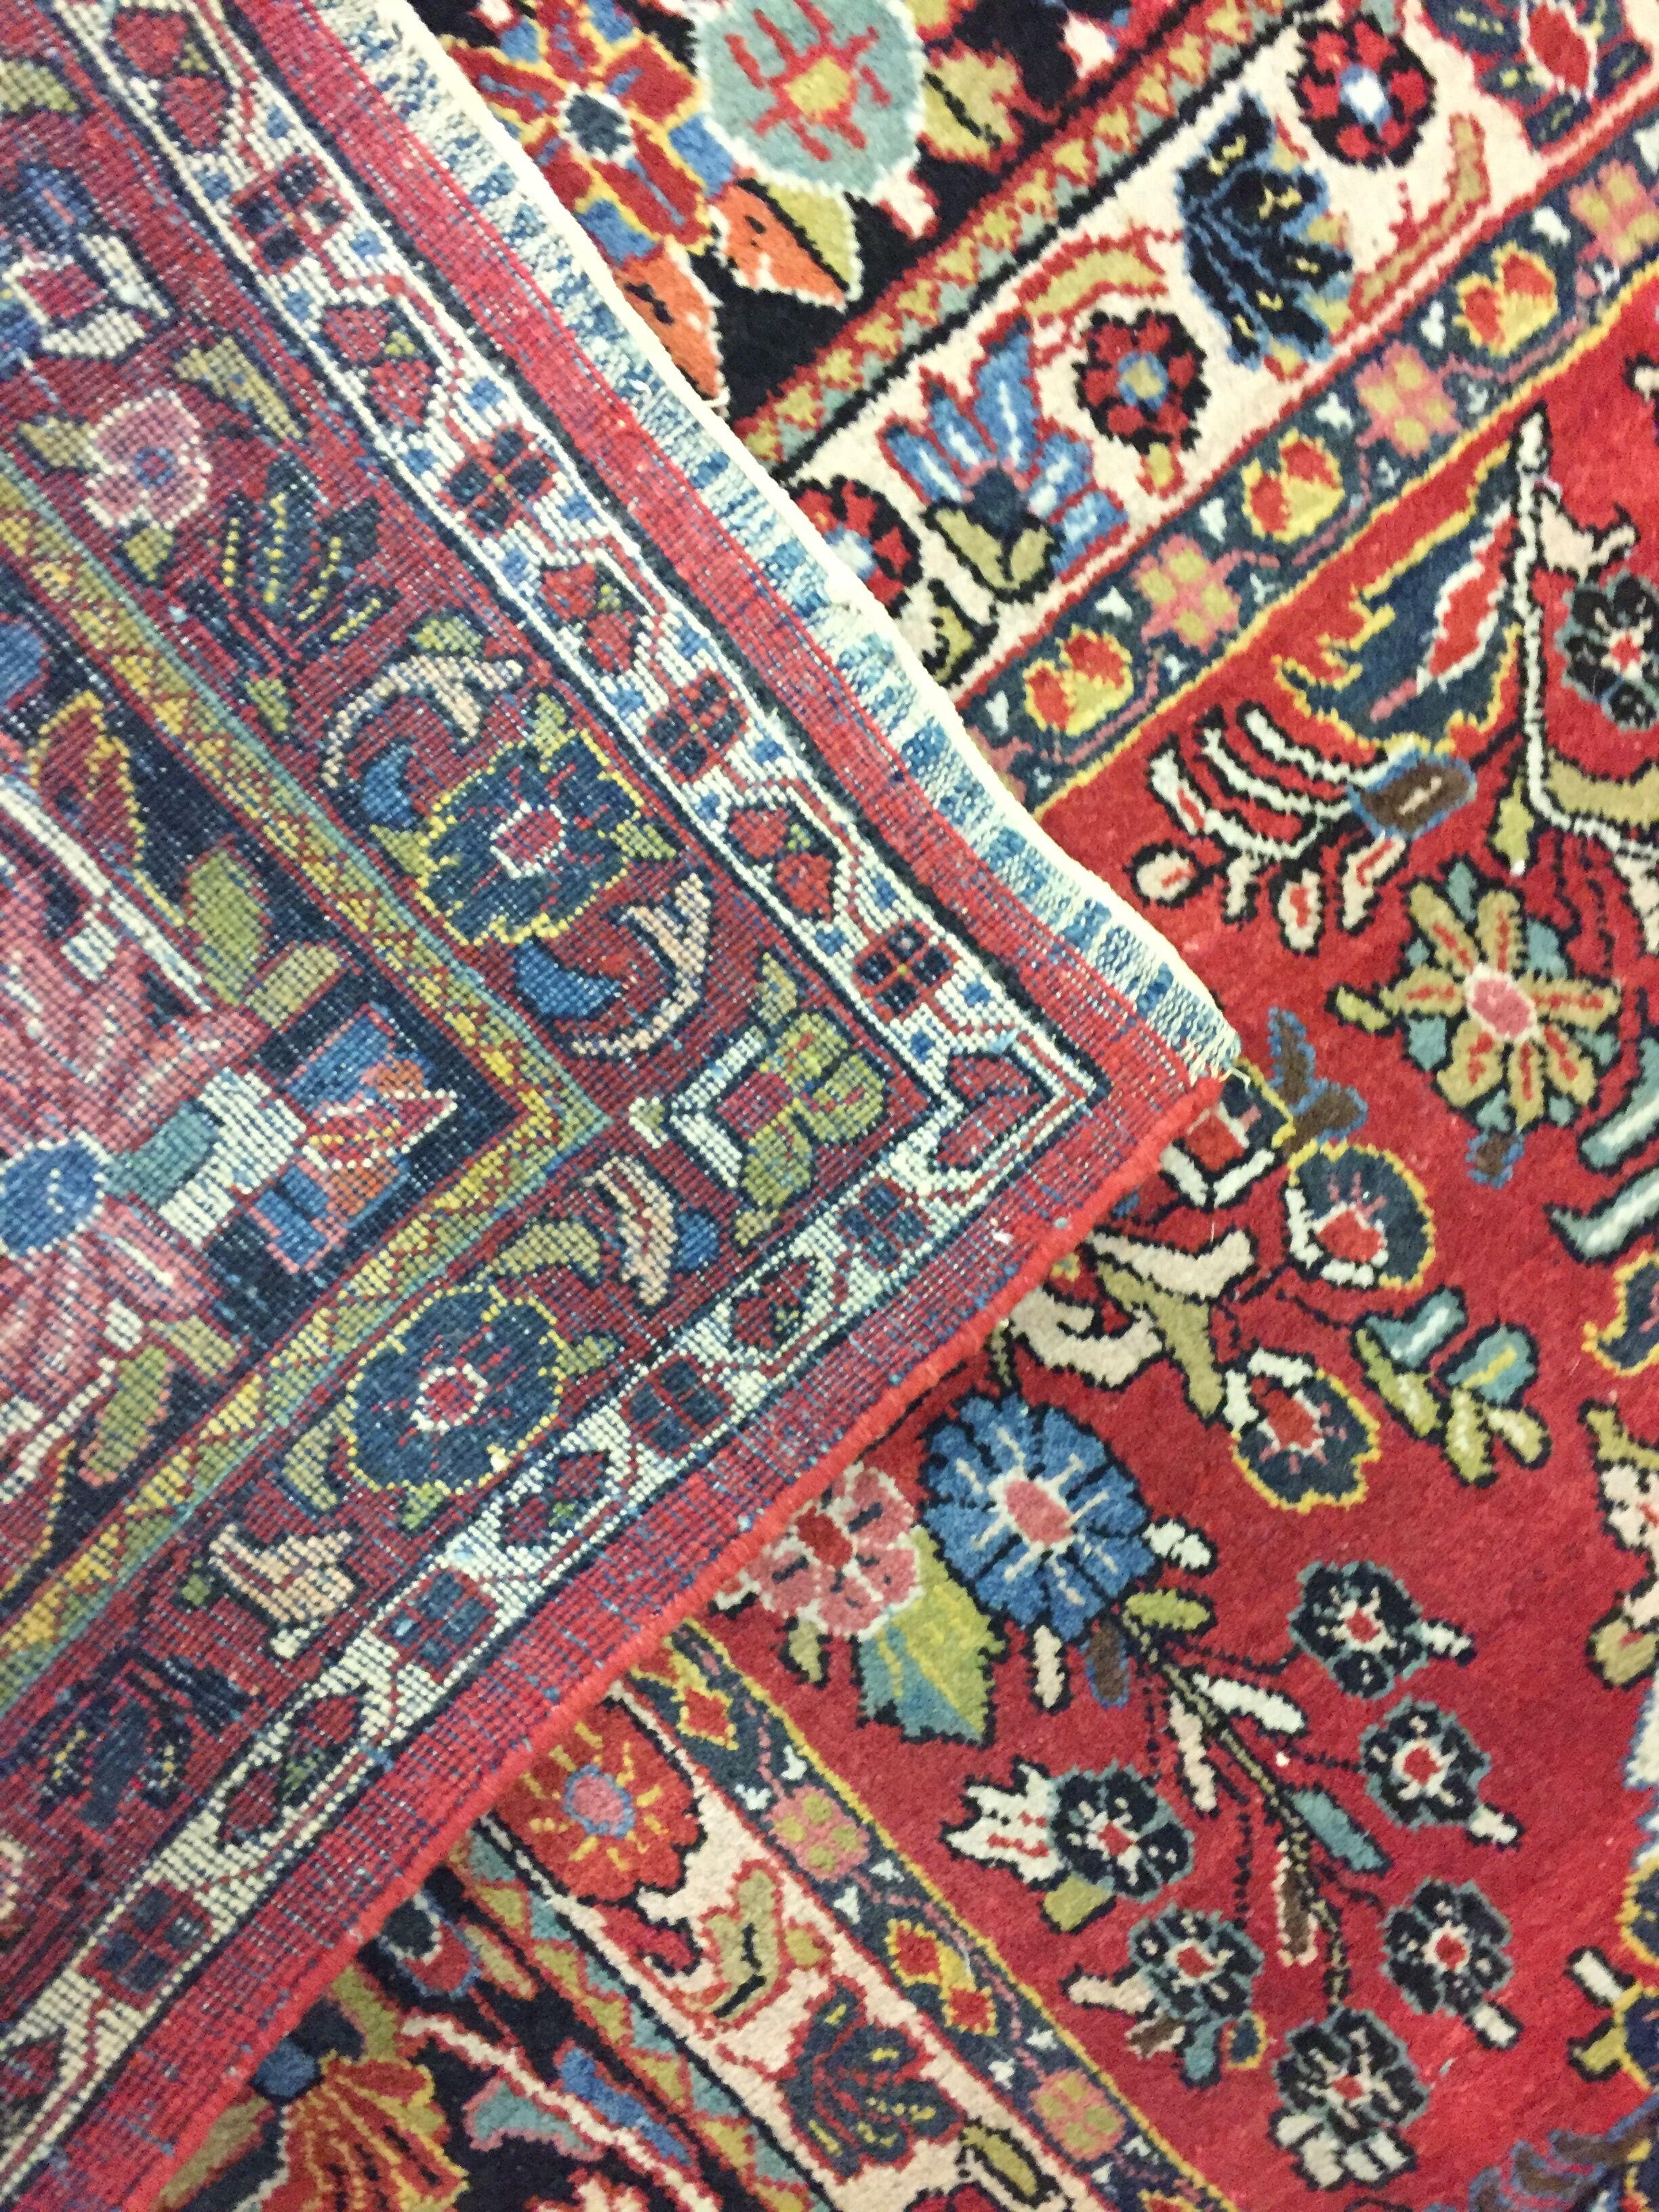 Vintage Persian Sarouk rug 9'2 x 11'9. Vintage handwoven Sarouk rug with a floral design on a terracotta field. The main field is filled with wonderful floral designs expertly hand knotted by skilled craftsmen. The field is surrounded by a main